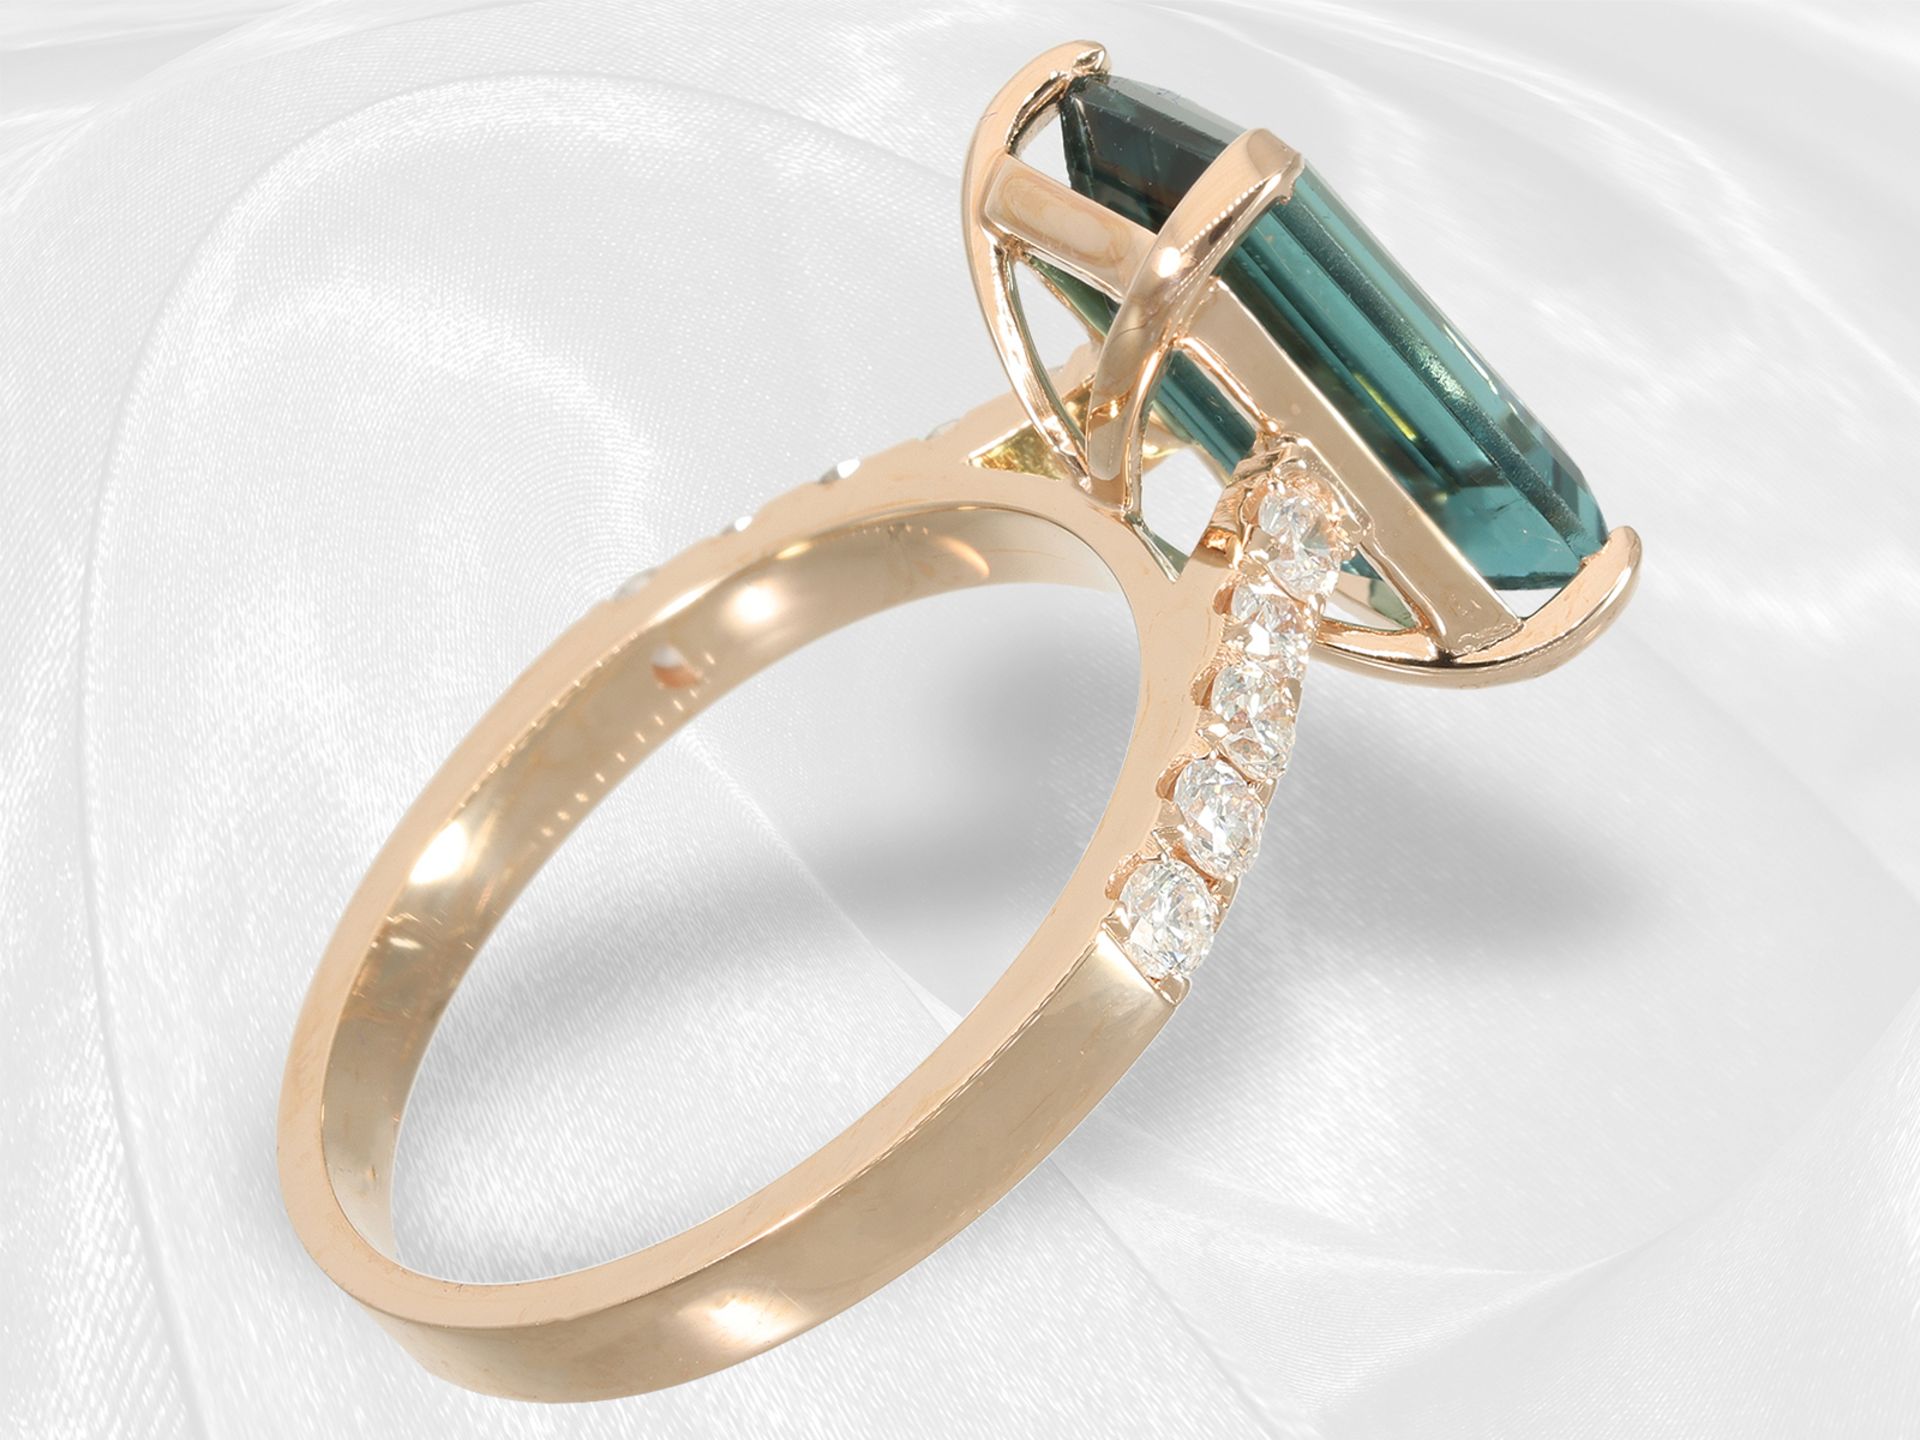 Ring: beautiful goldsmith's ring with tourmaline and brilliant-cut diamonds, 18K gold - Image 8 of 10